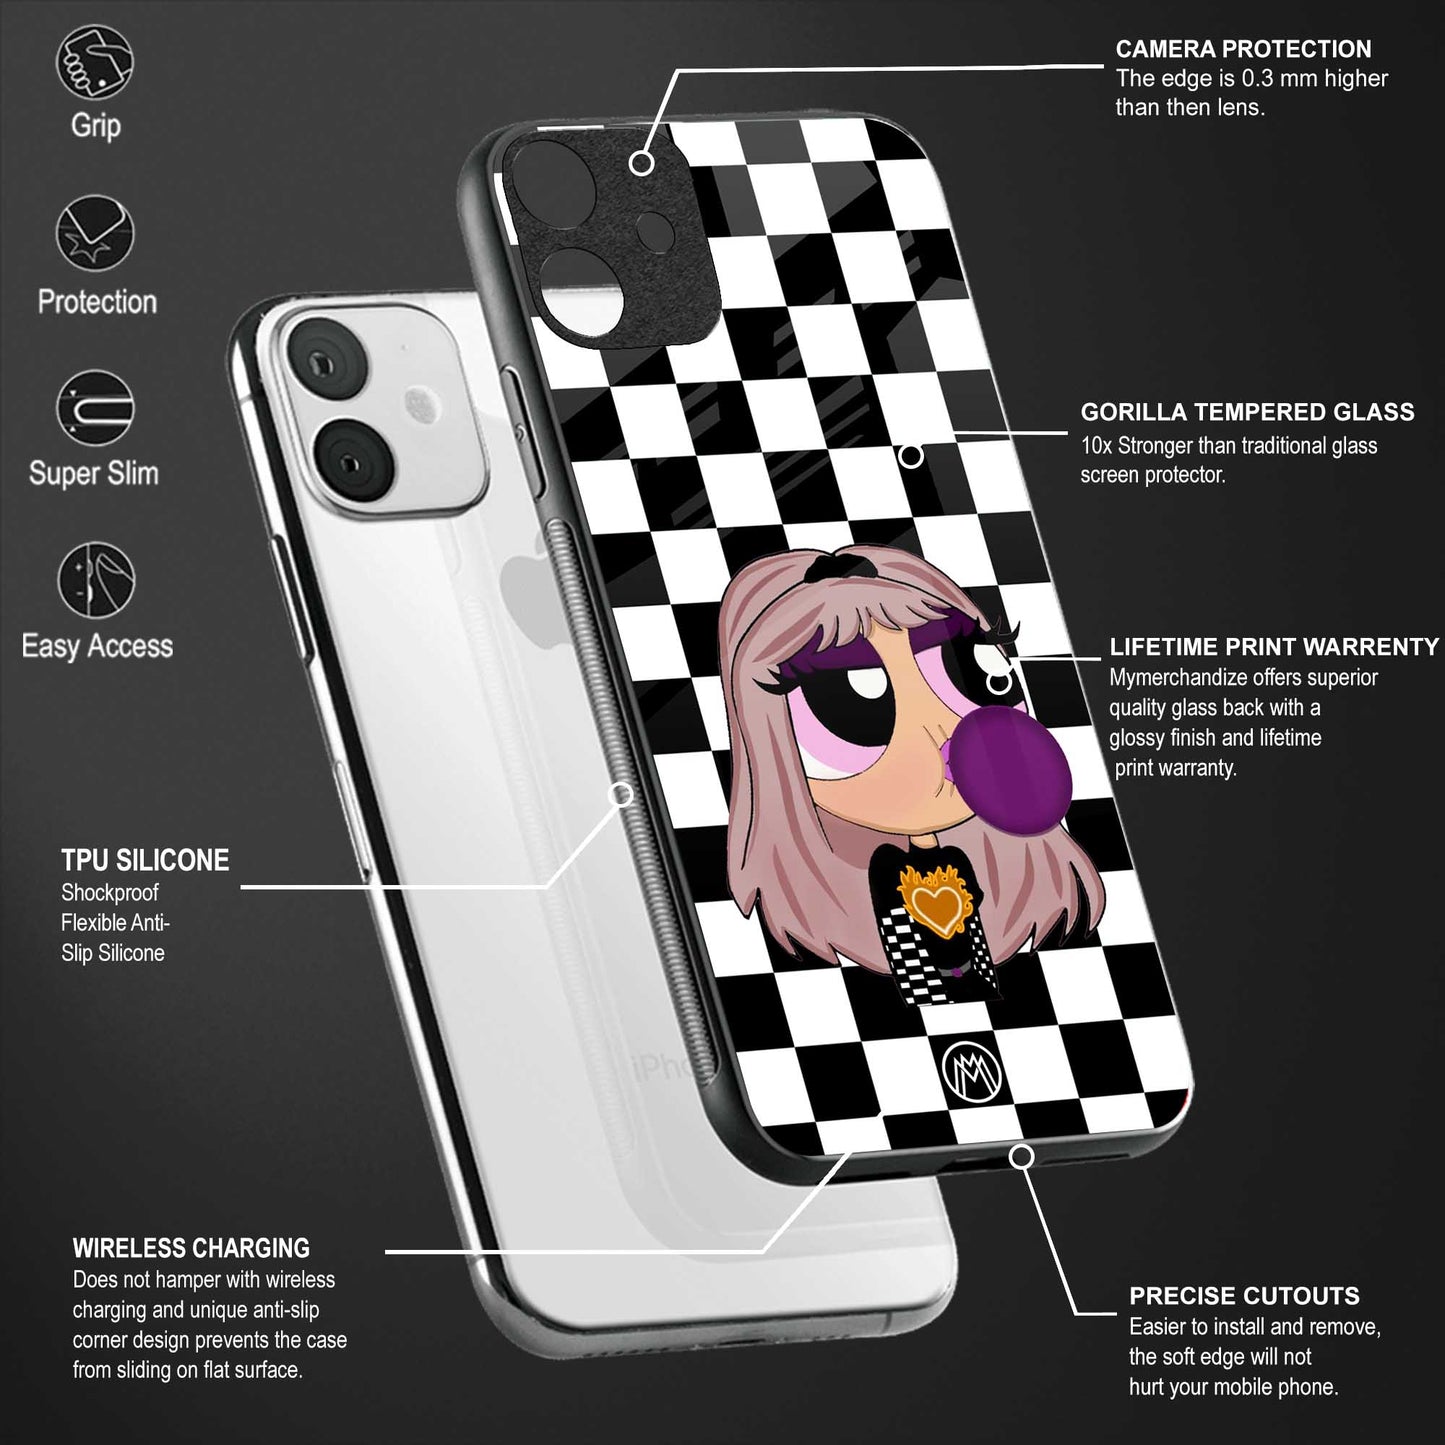 sassy chic powerpuff girls back phone cover | glass case for google pixel 4a 4g